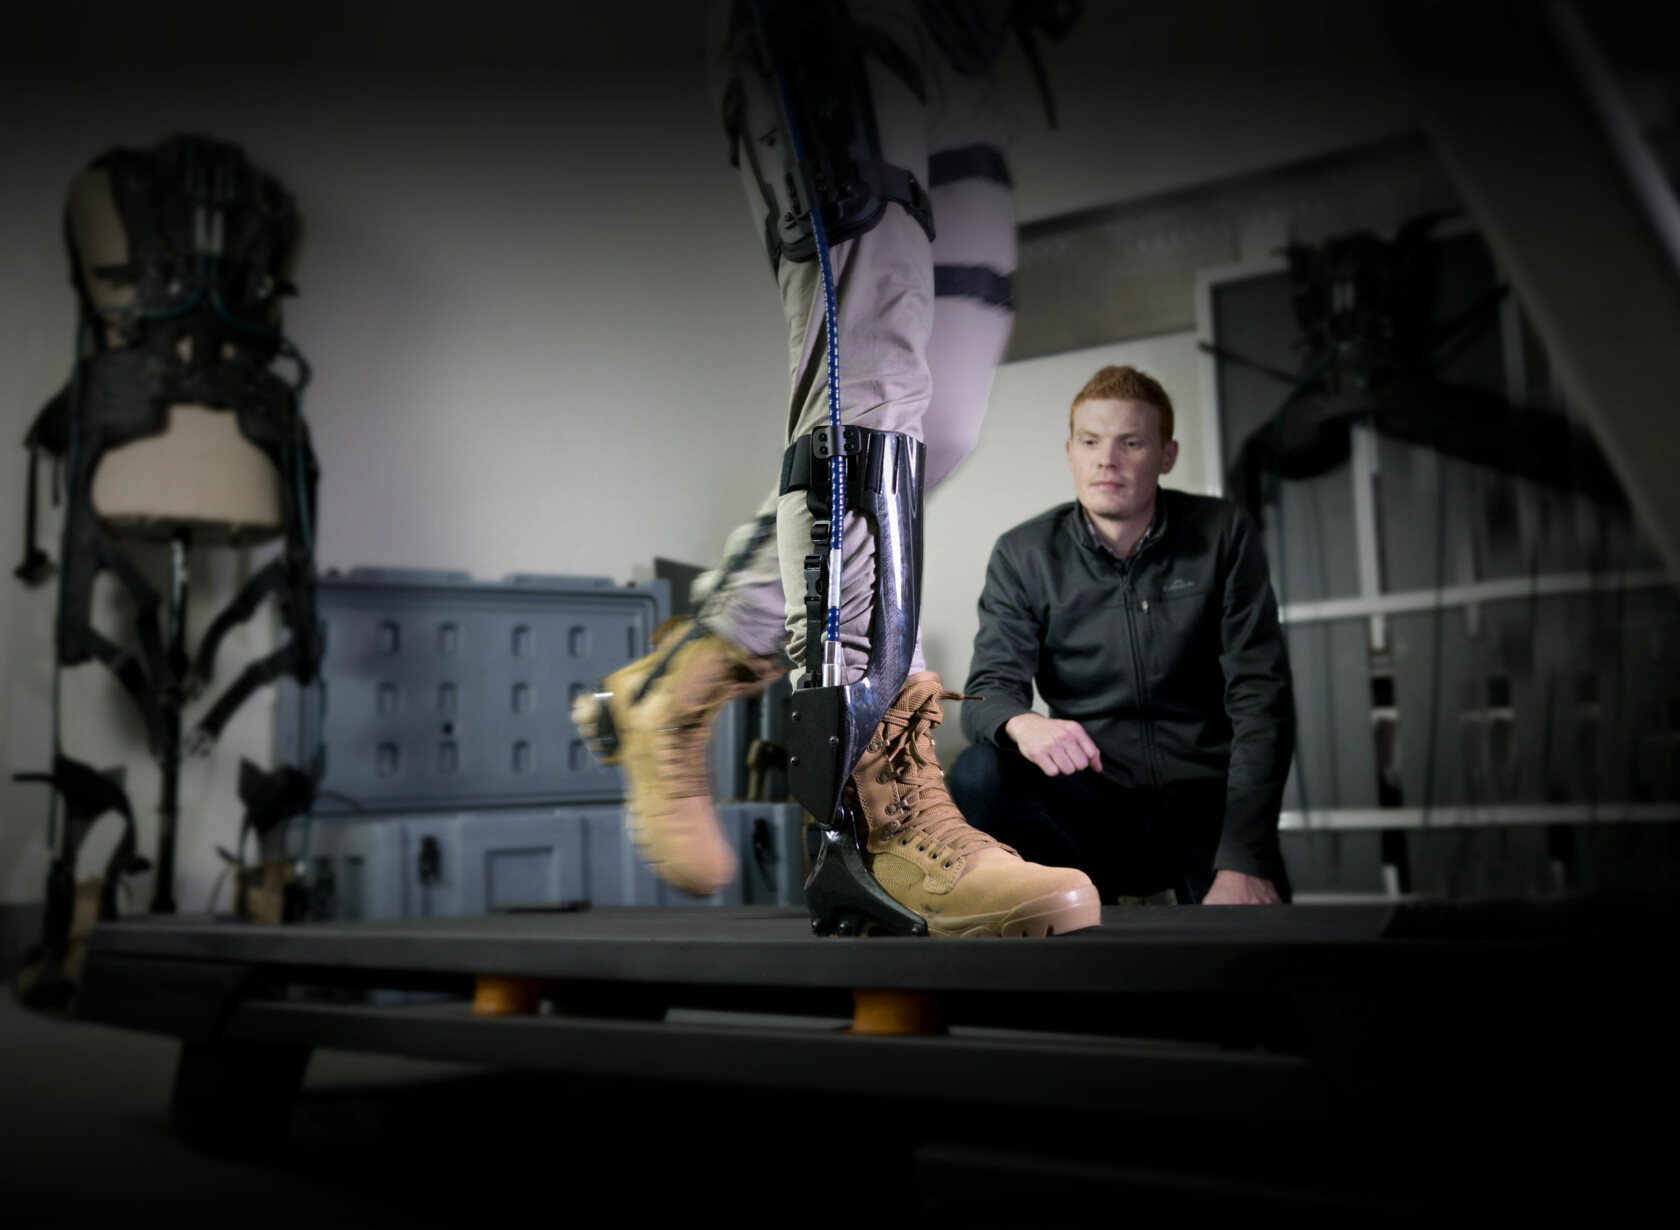 OX exoskeleton project leader observing user testing the equipment on a treadmill